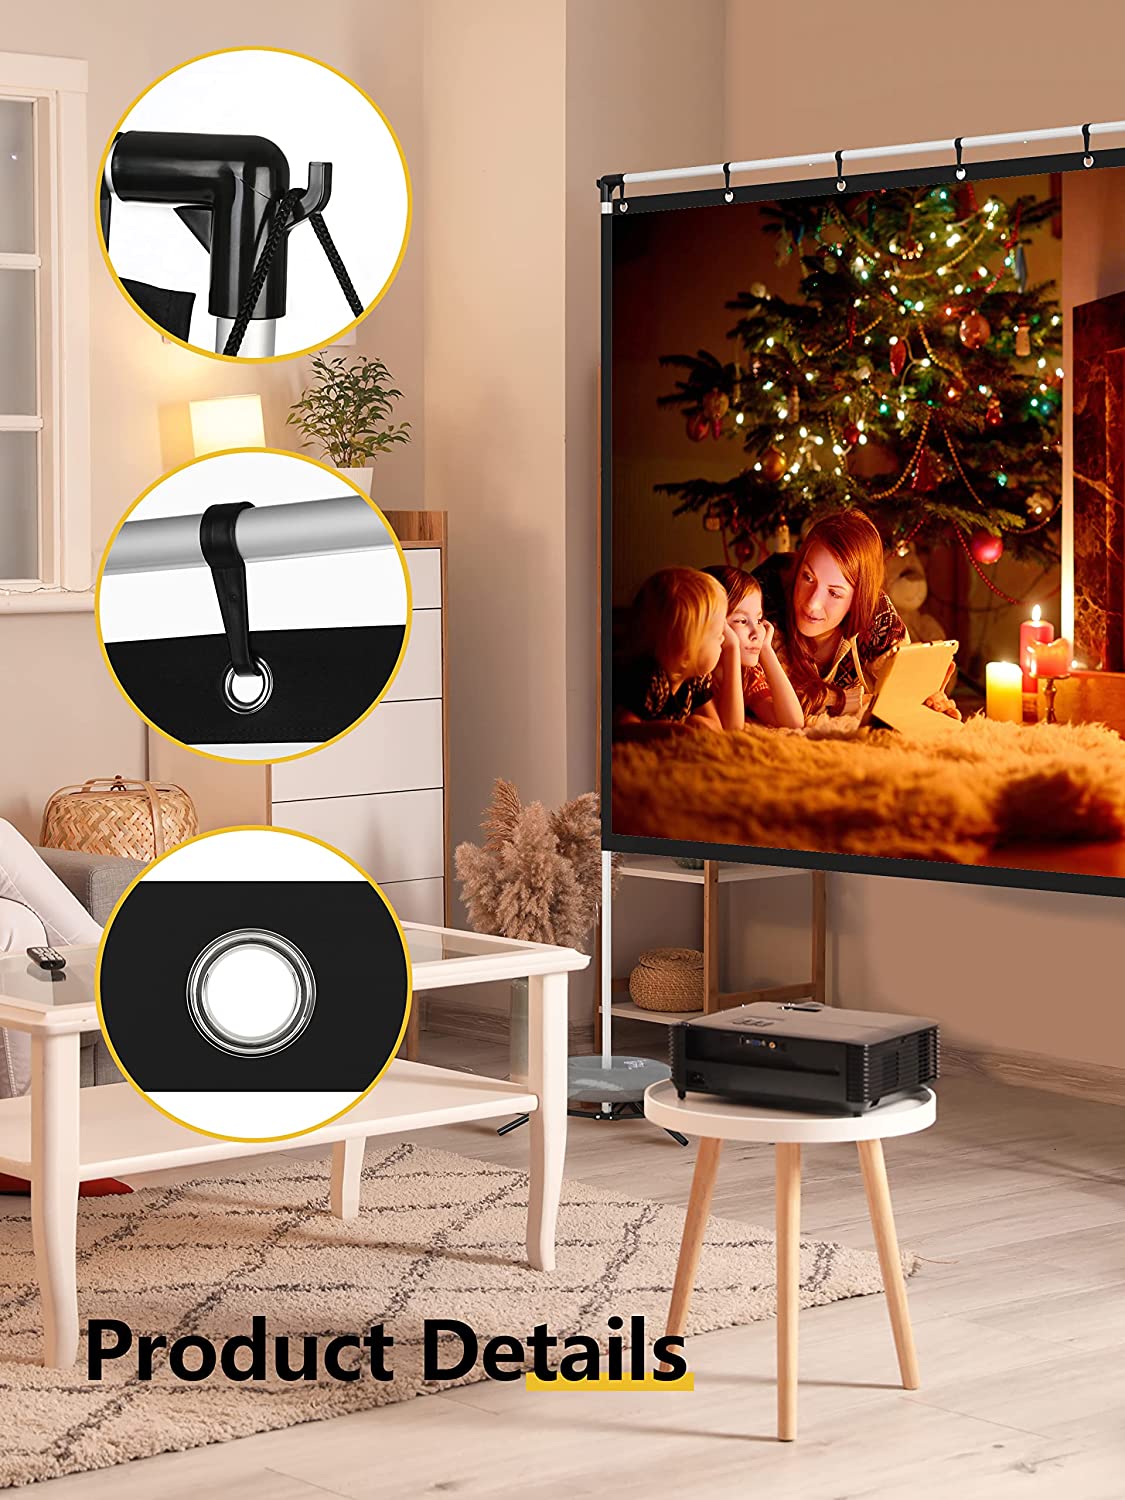 Portable Projector Screen with Stand, WEWATCH 120 inch Foldable Projection Screen 16:9, 4K HD Outdoor Movies Screen with Carry Bag for Indoor Home Theater Backyard Travel - image 3 of 6